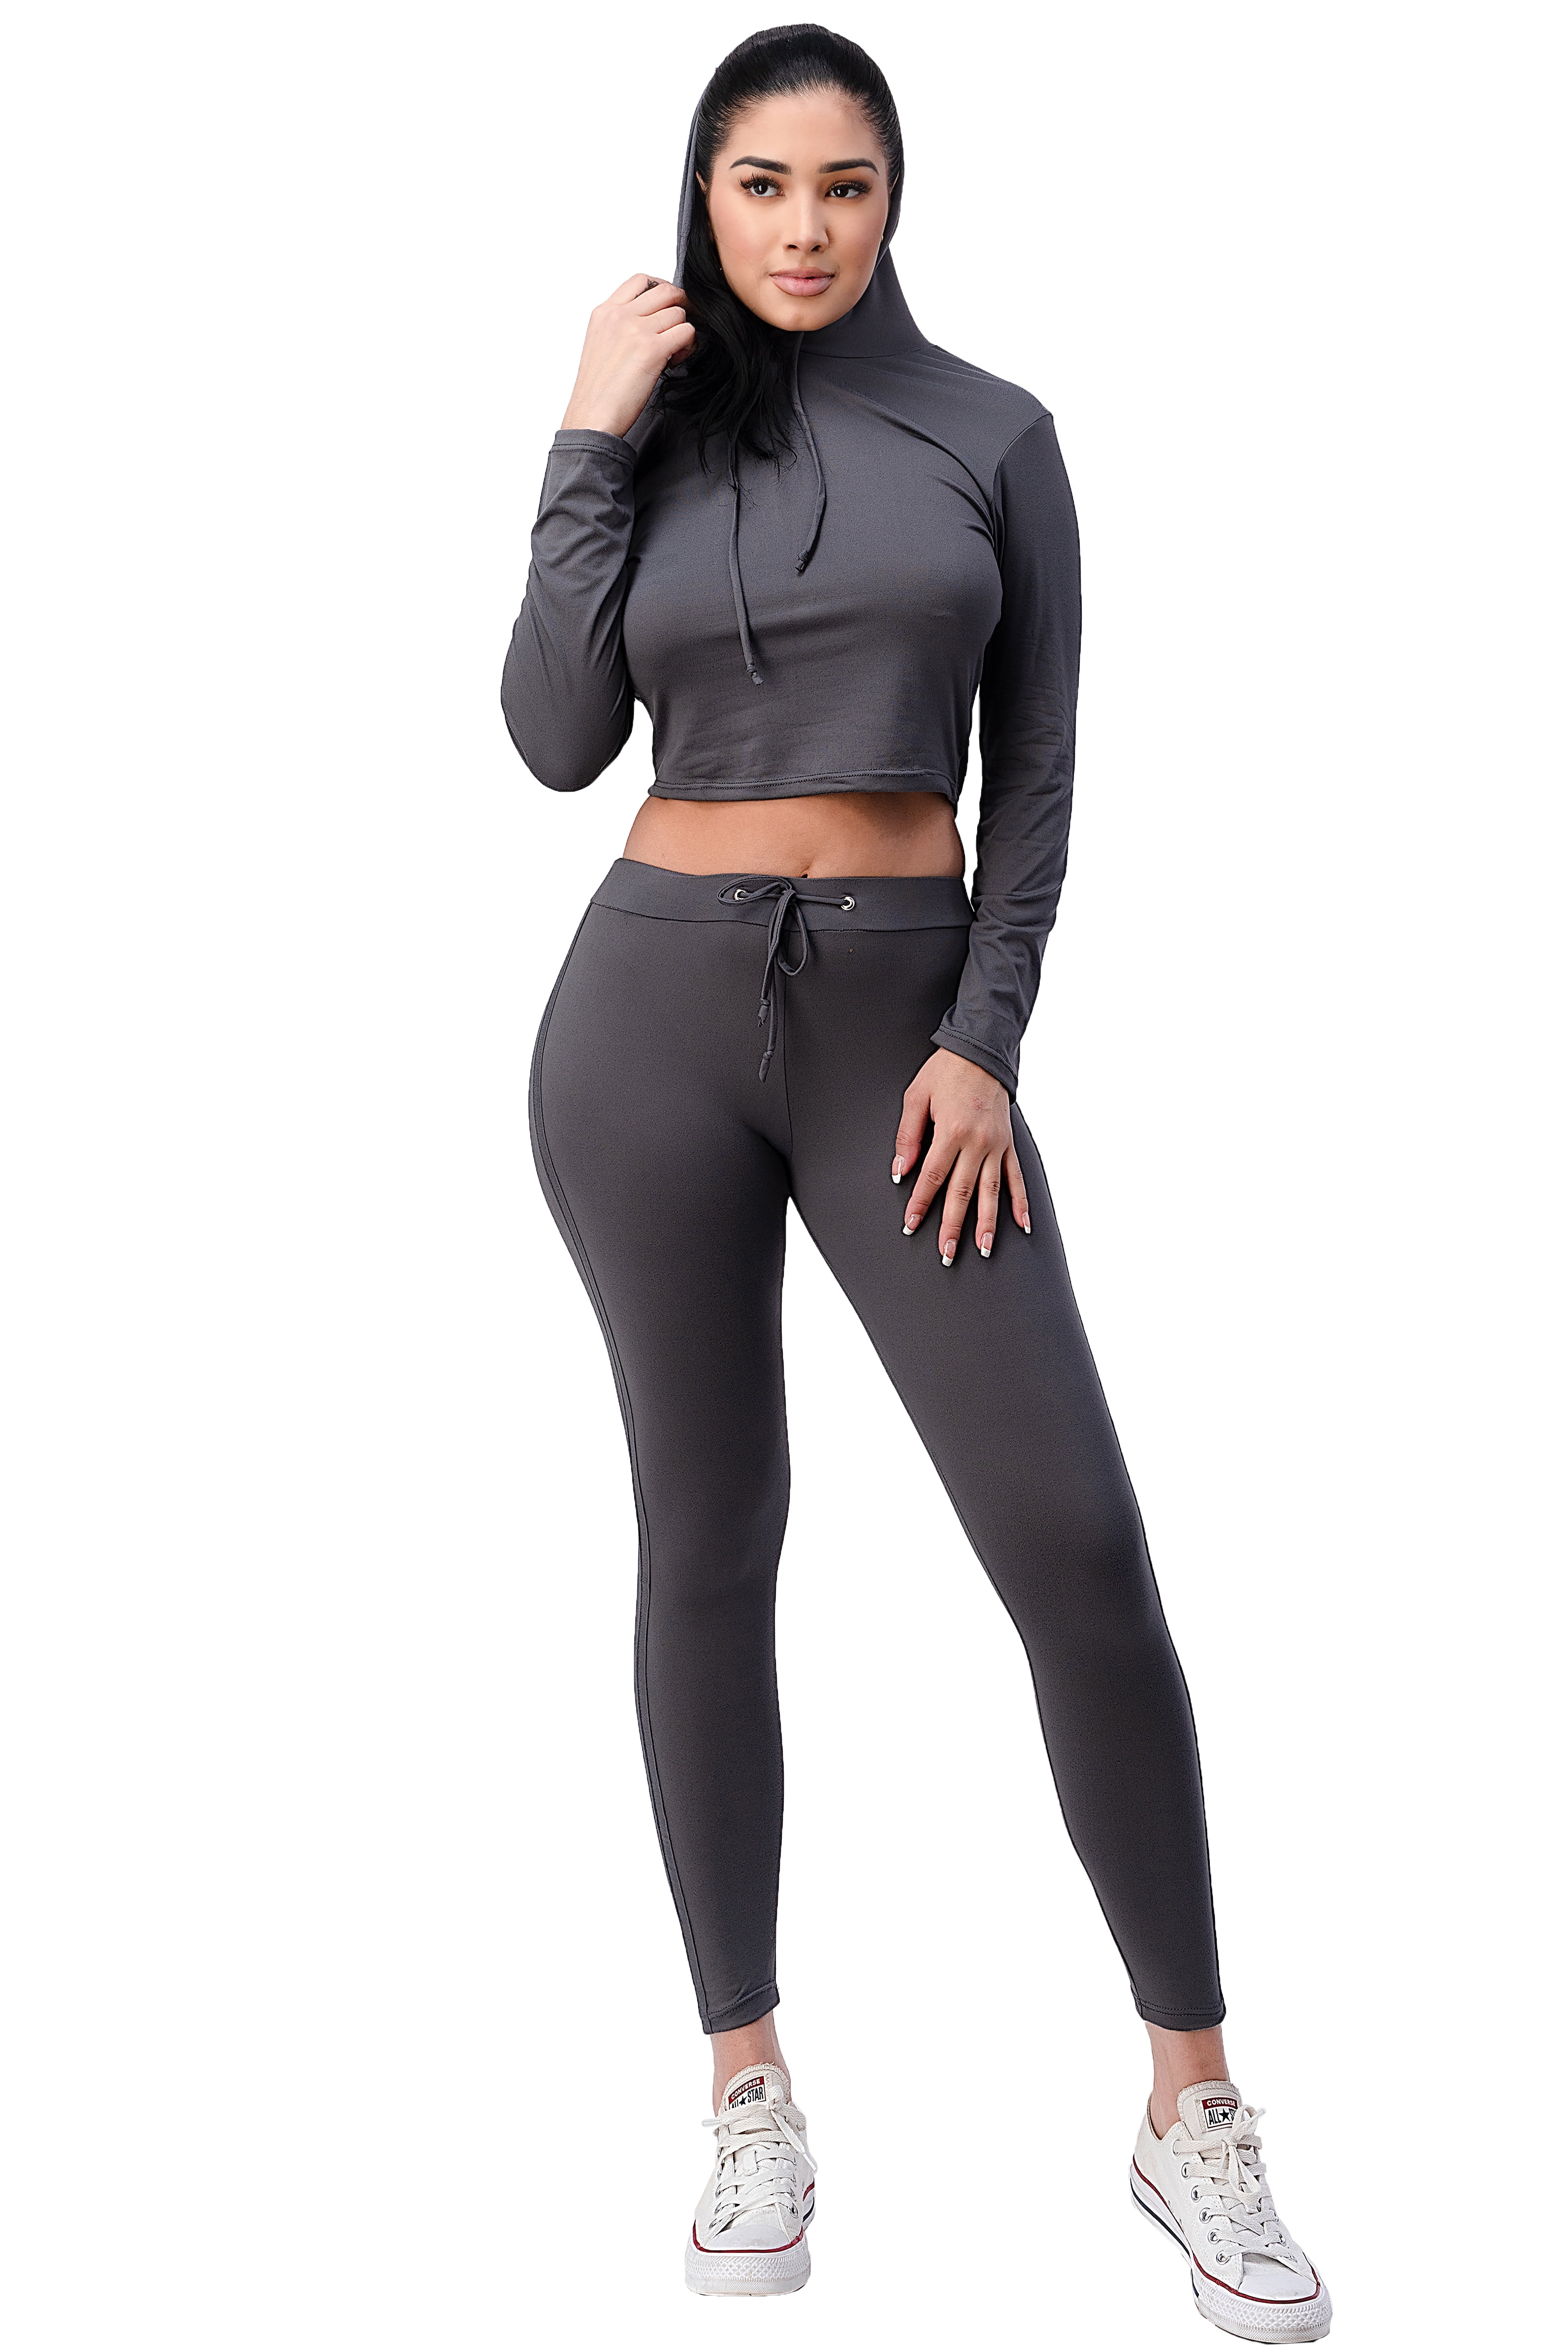 Workout Outfit, Hooded Hoodie, Harem Pants Set, Women Tracksuit, Outfit,  Women Activewear, Sport Outfit MEGAN SE0669W2 